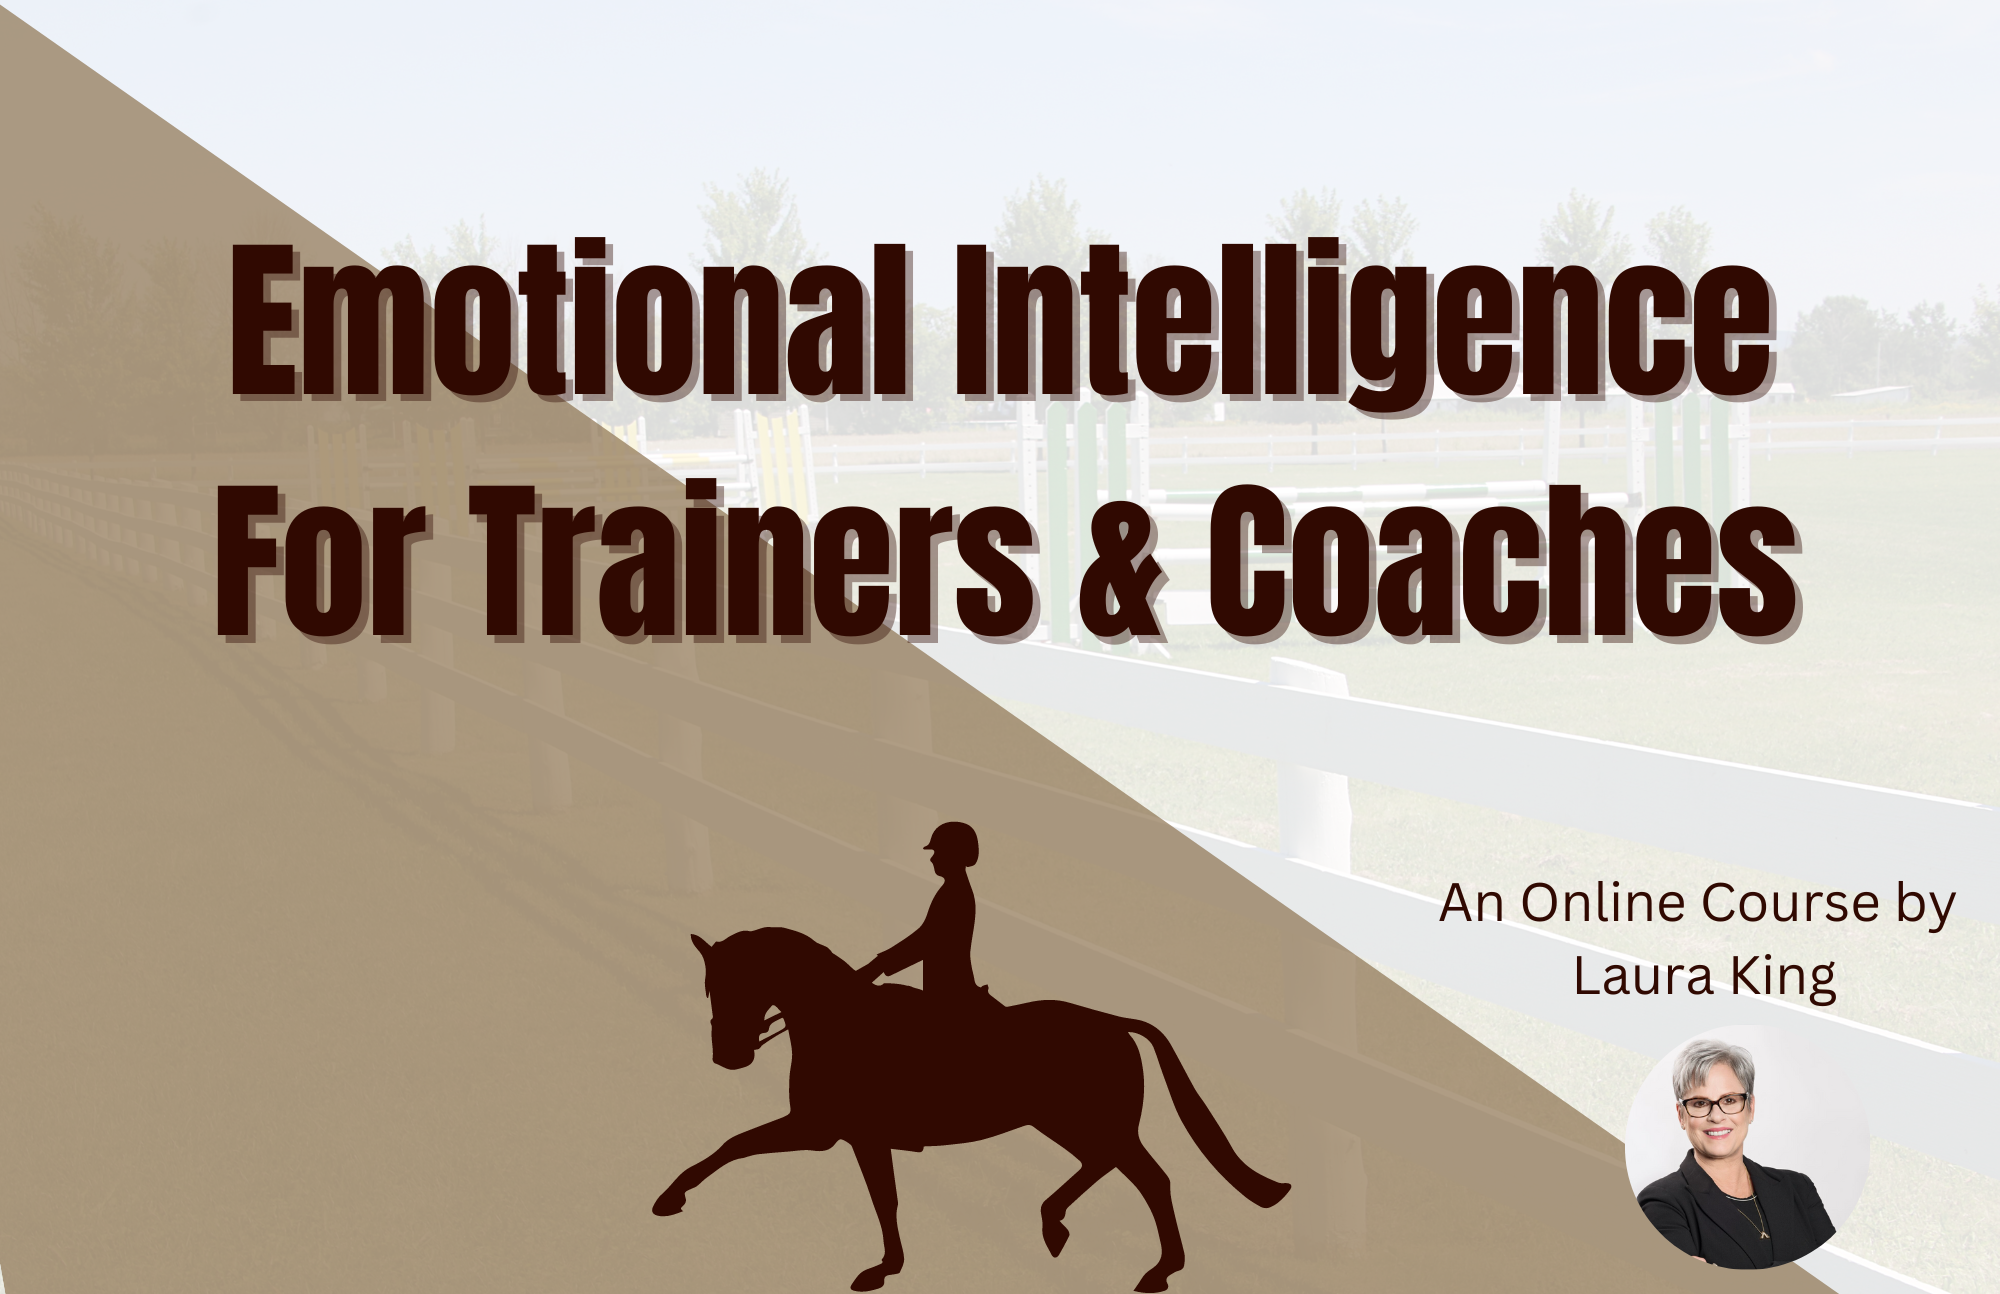 Emotional Intelligence For Trainers & Coaches